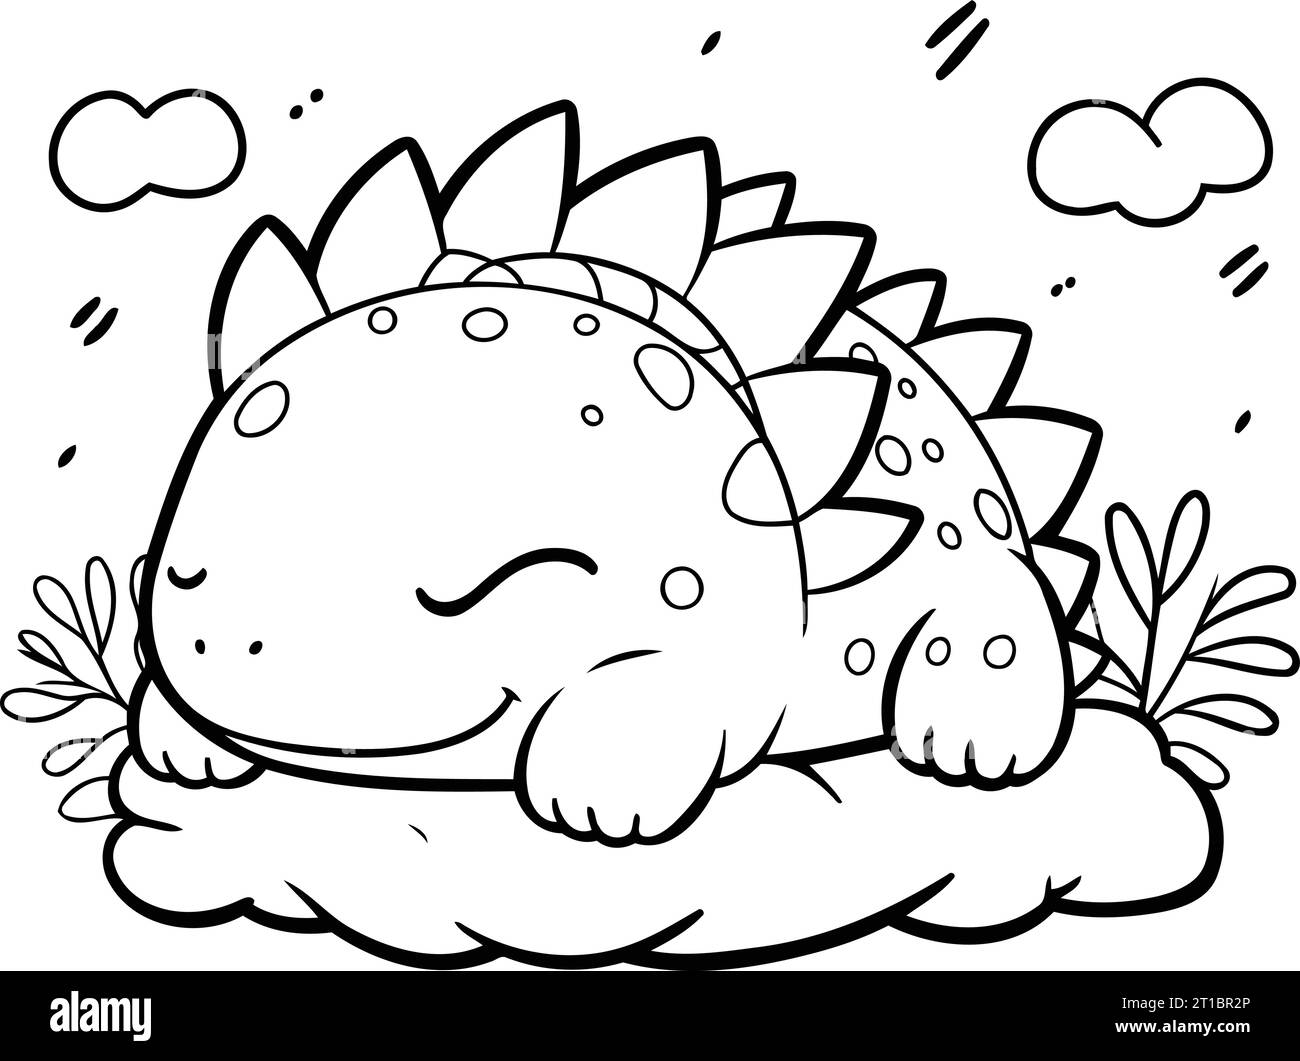 Black and white Pterodactyl dino flying among the clouds to nest with eggs.  Summer scene outline illustration with cute dinosaur. Funny prehistoric  reptiles coloring page for children. Stock Vector